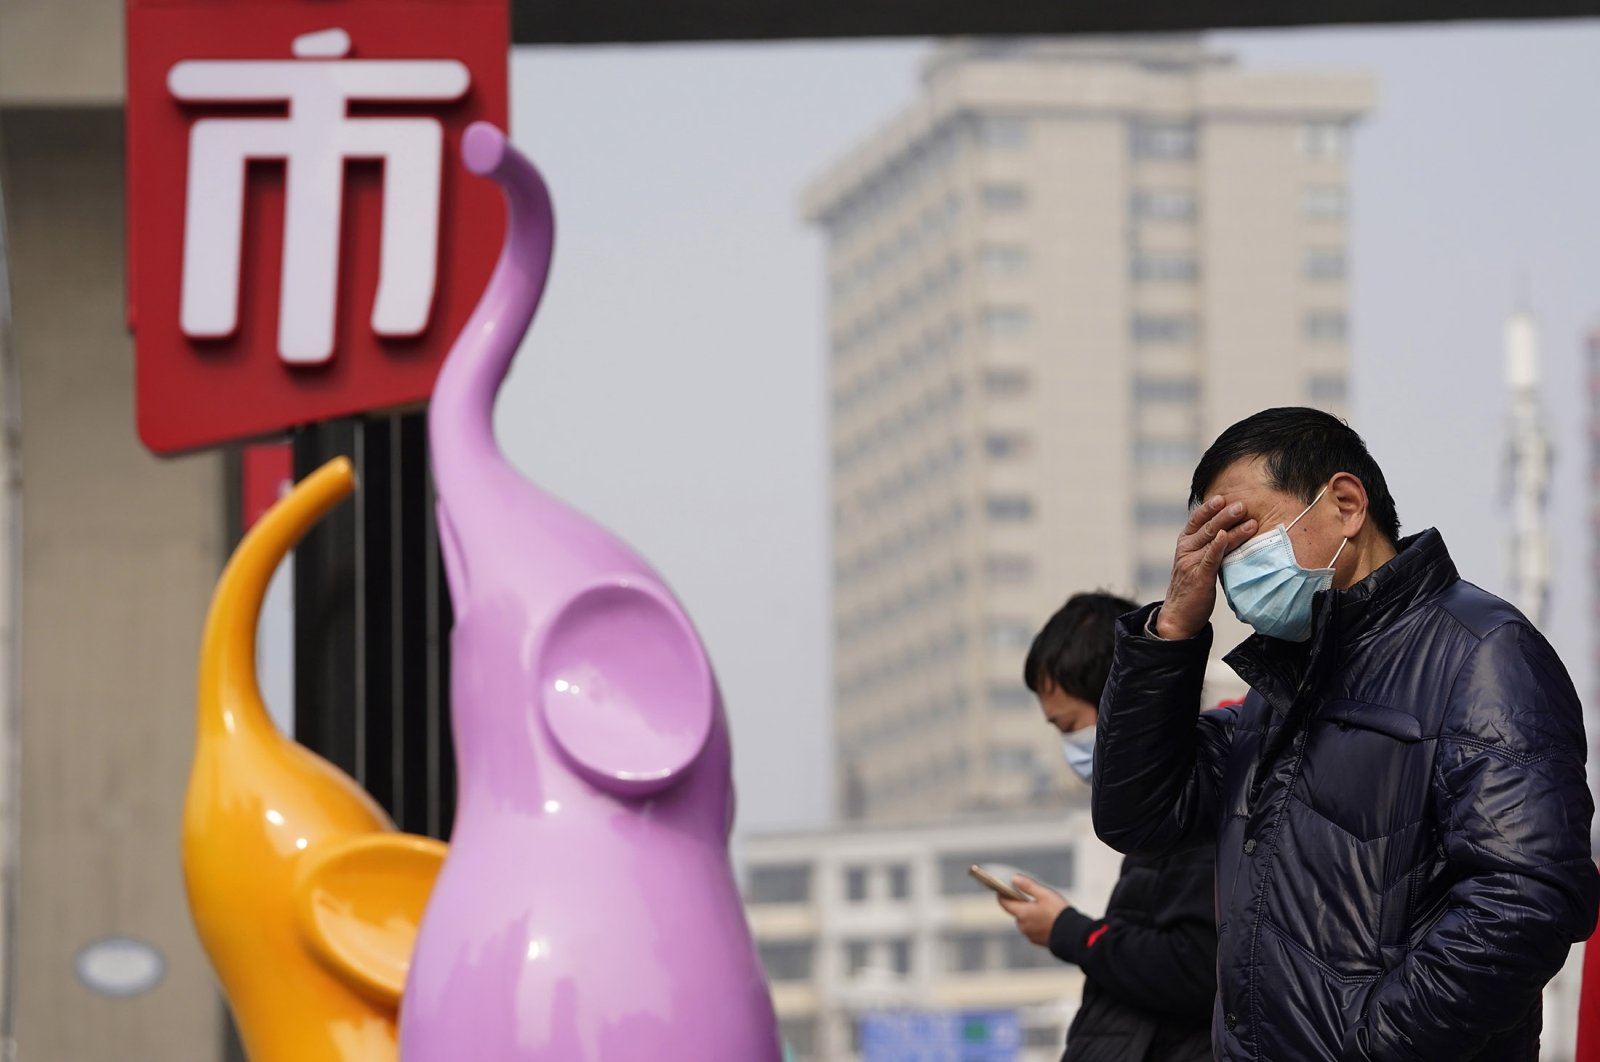 Residents wearing masks to curb the spread of the coronavirus stand near the Chinese character for "Market" in Wuhan, China, Jan. 26, 2021. (AP Photo)